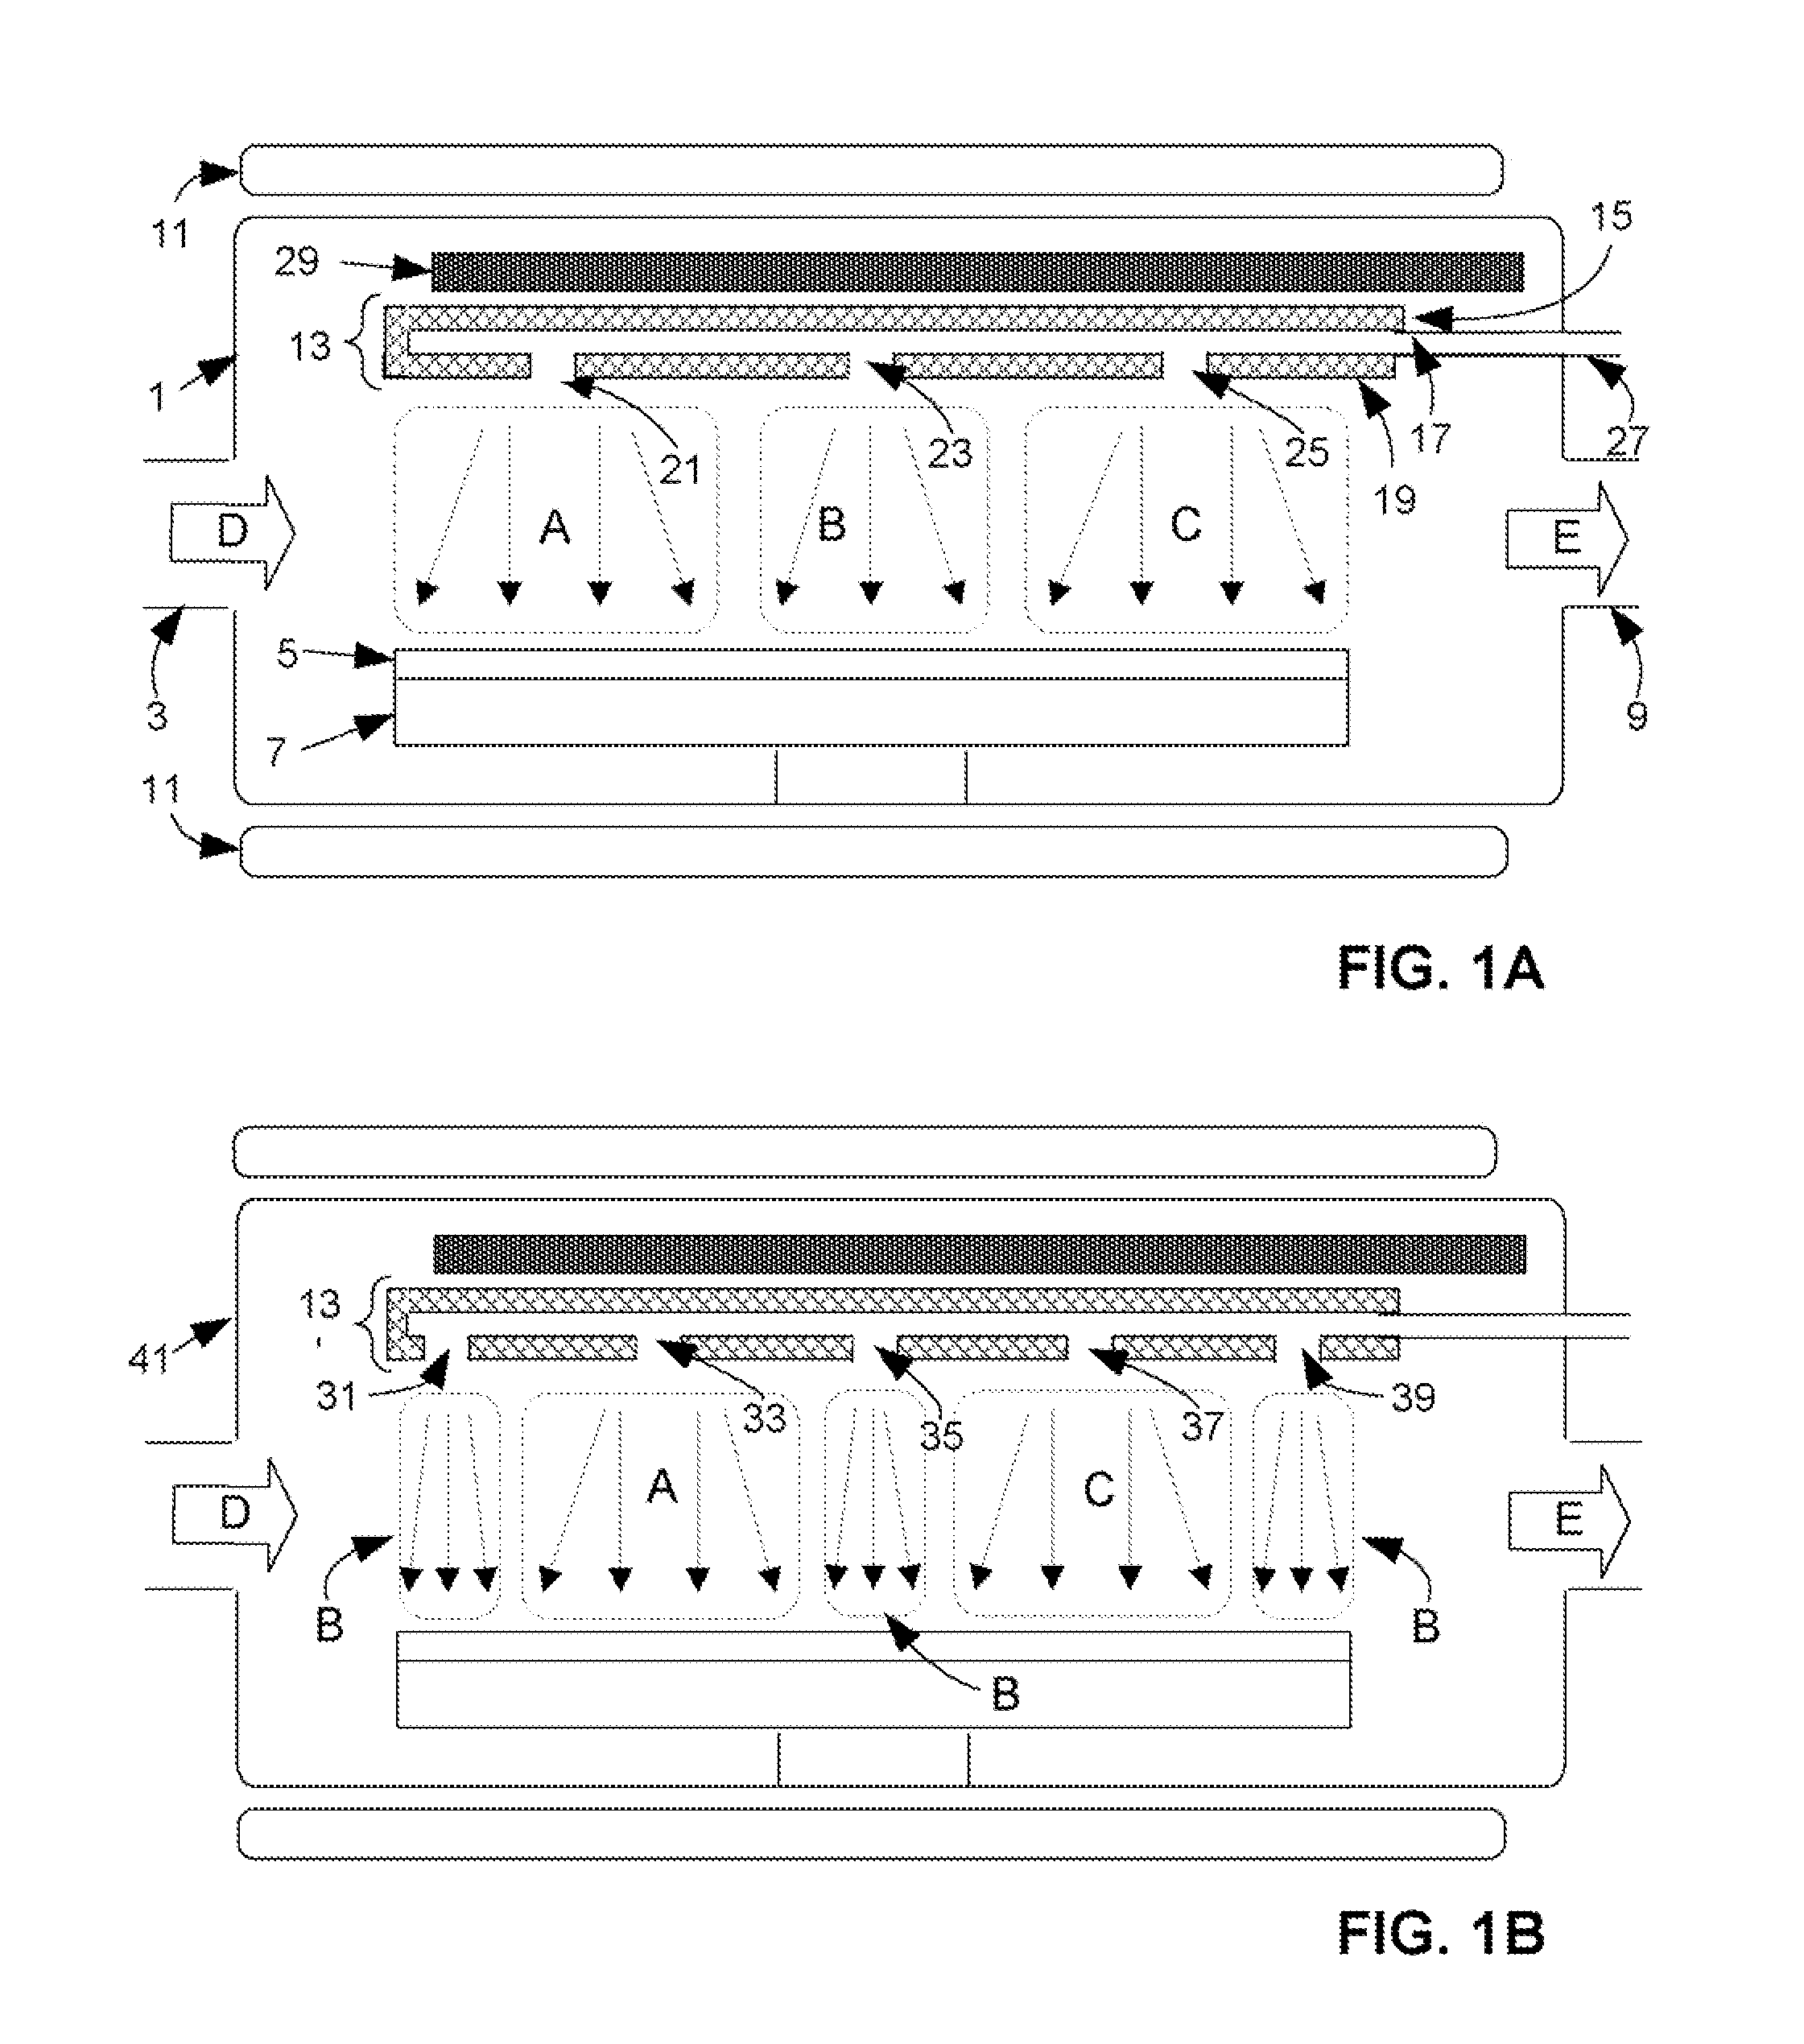 Apparatus for delivering precursor gases to an epitaxial growth substrate